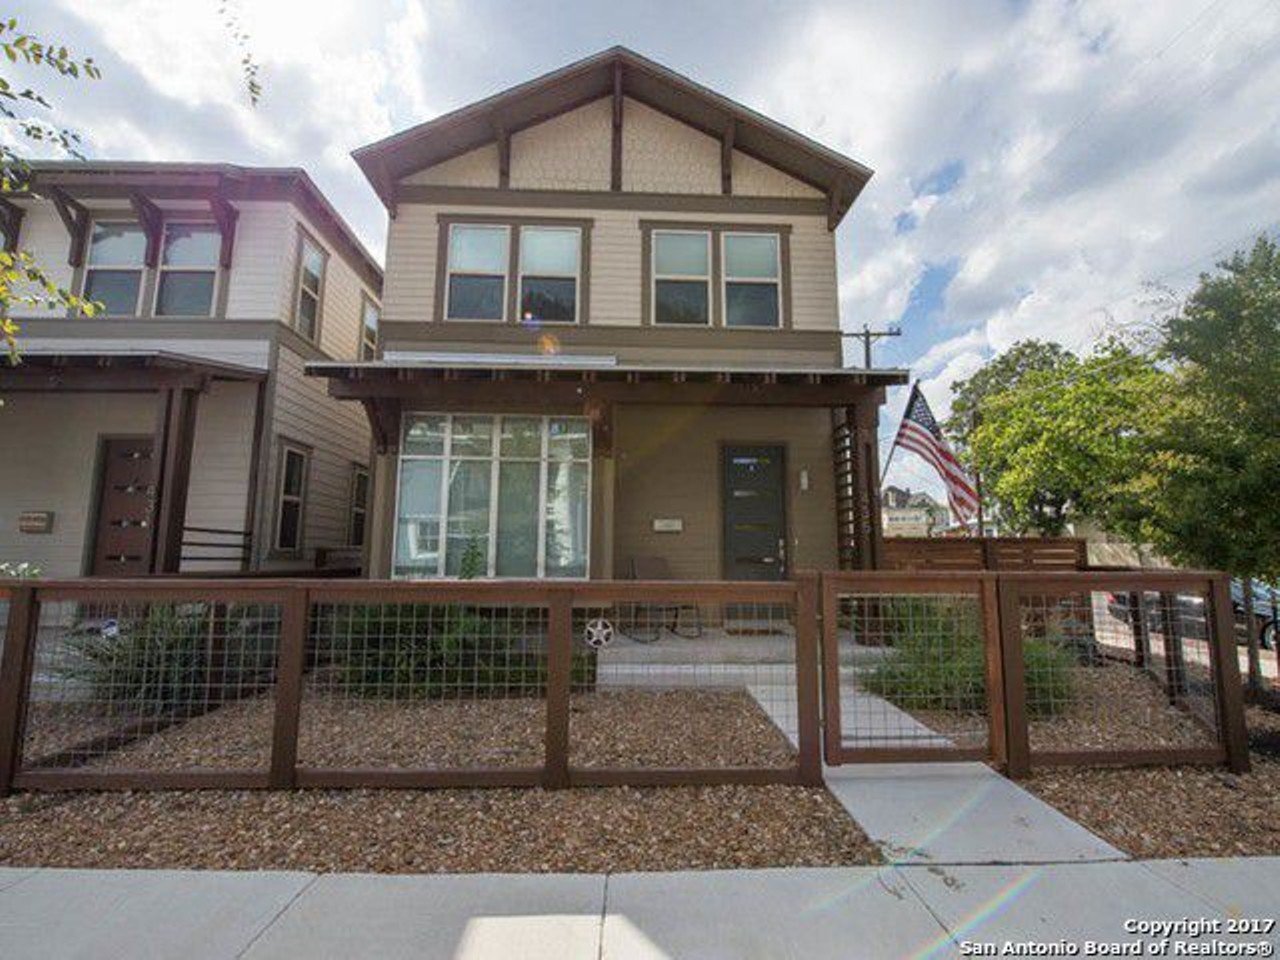 435 Paschal St.
$2,650/month
3, beds, 2 1/2 baths, 1,705 sq. ft.
This Craftsman-style home is only two years old and less than a mile from all the action.